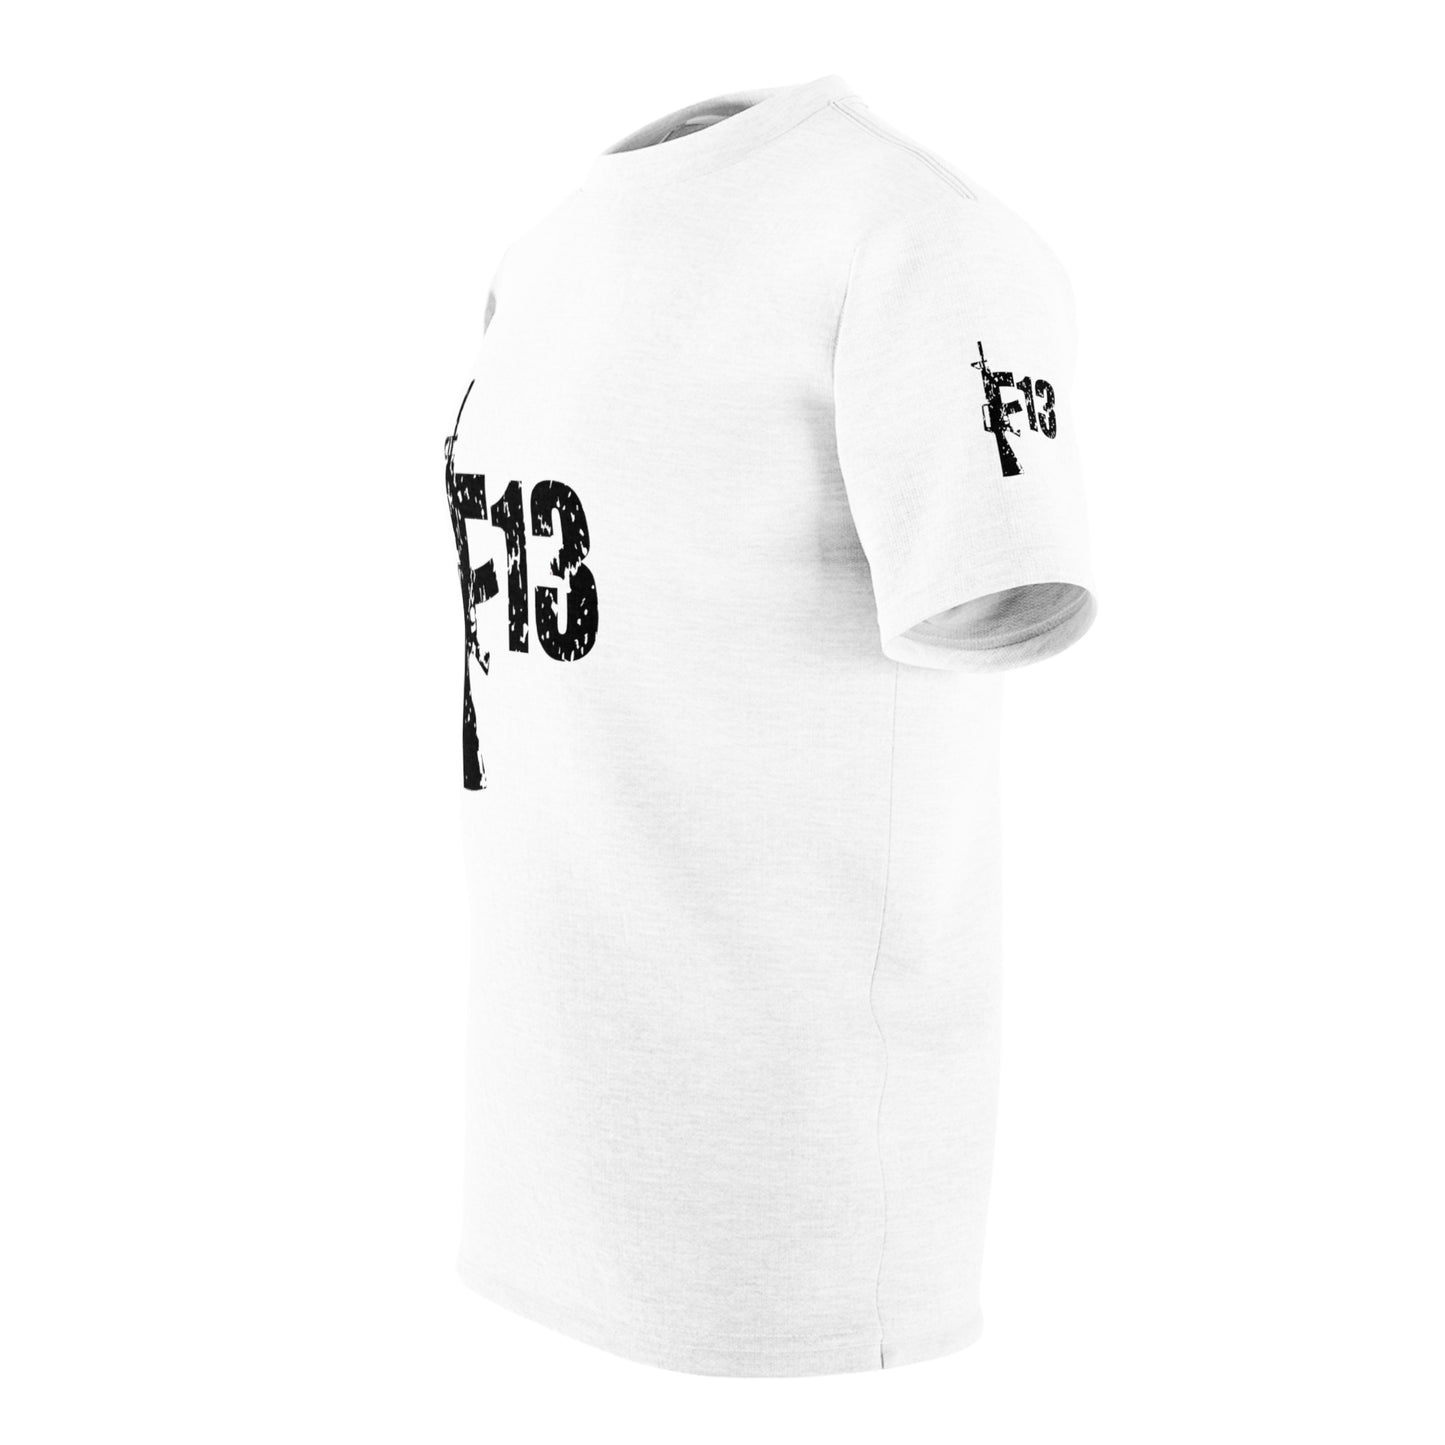 Unisex Cut & Sew Tee (AOP) F13 w flag and rifles on white